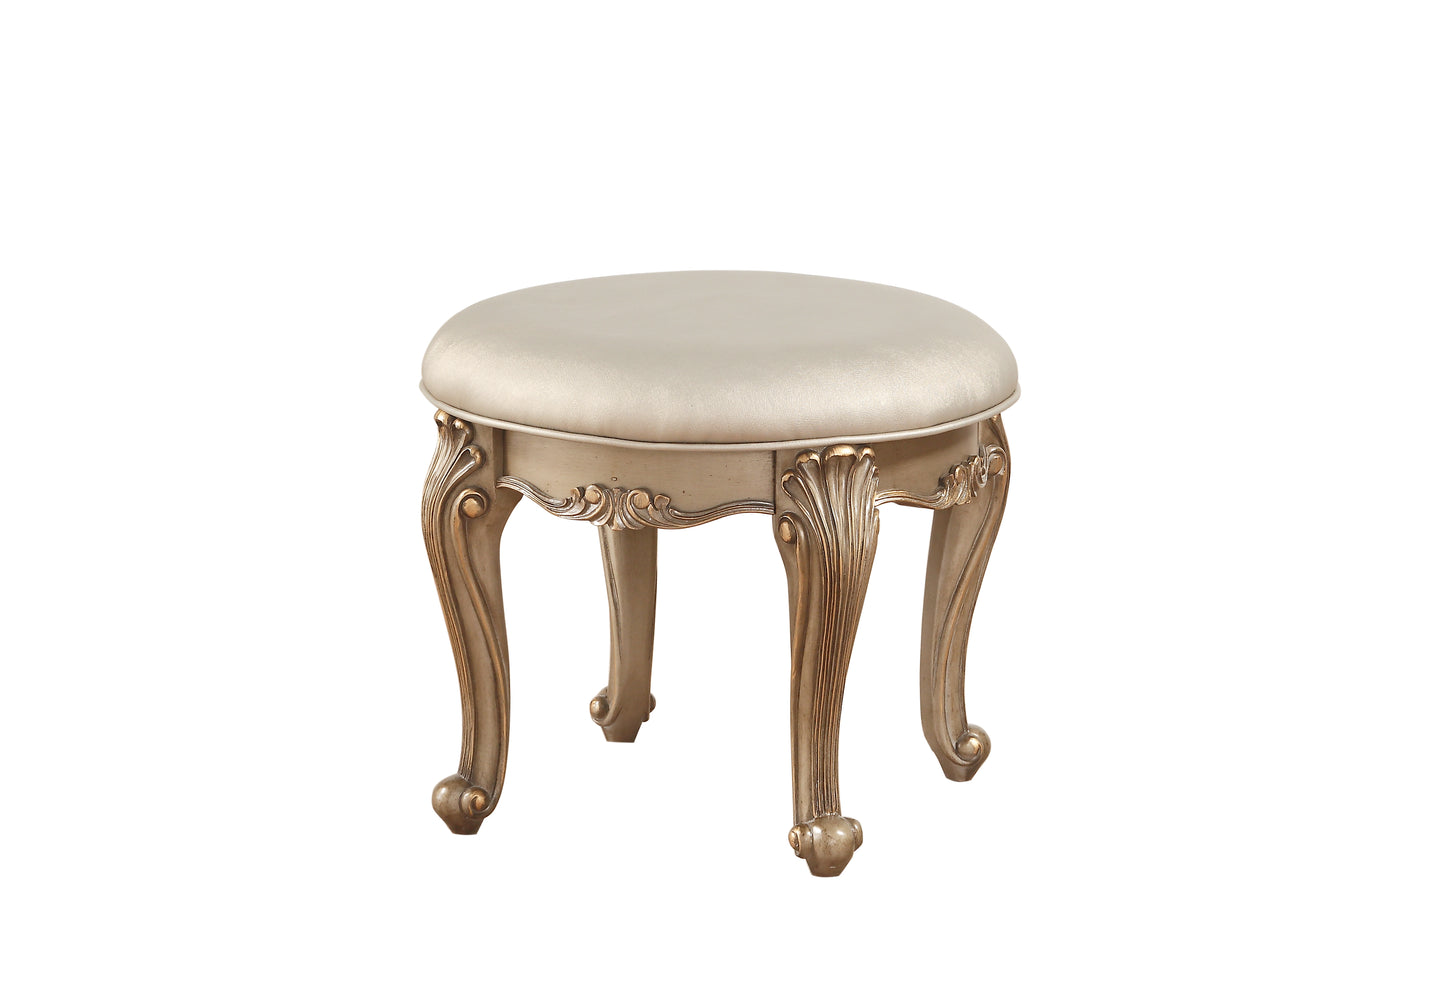 Orianne Champagne PU & Antique Gold Vanity Stool